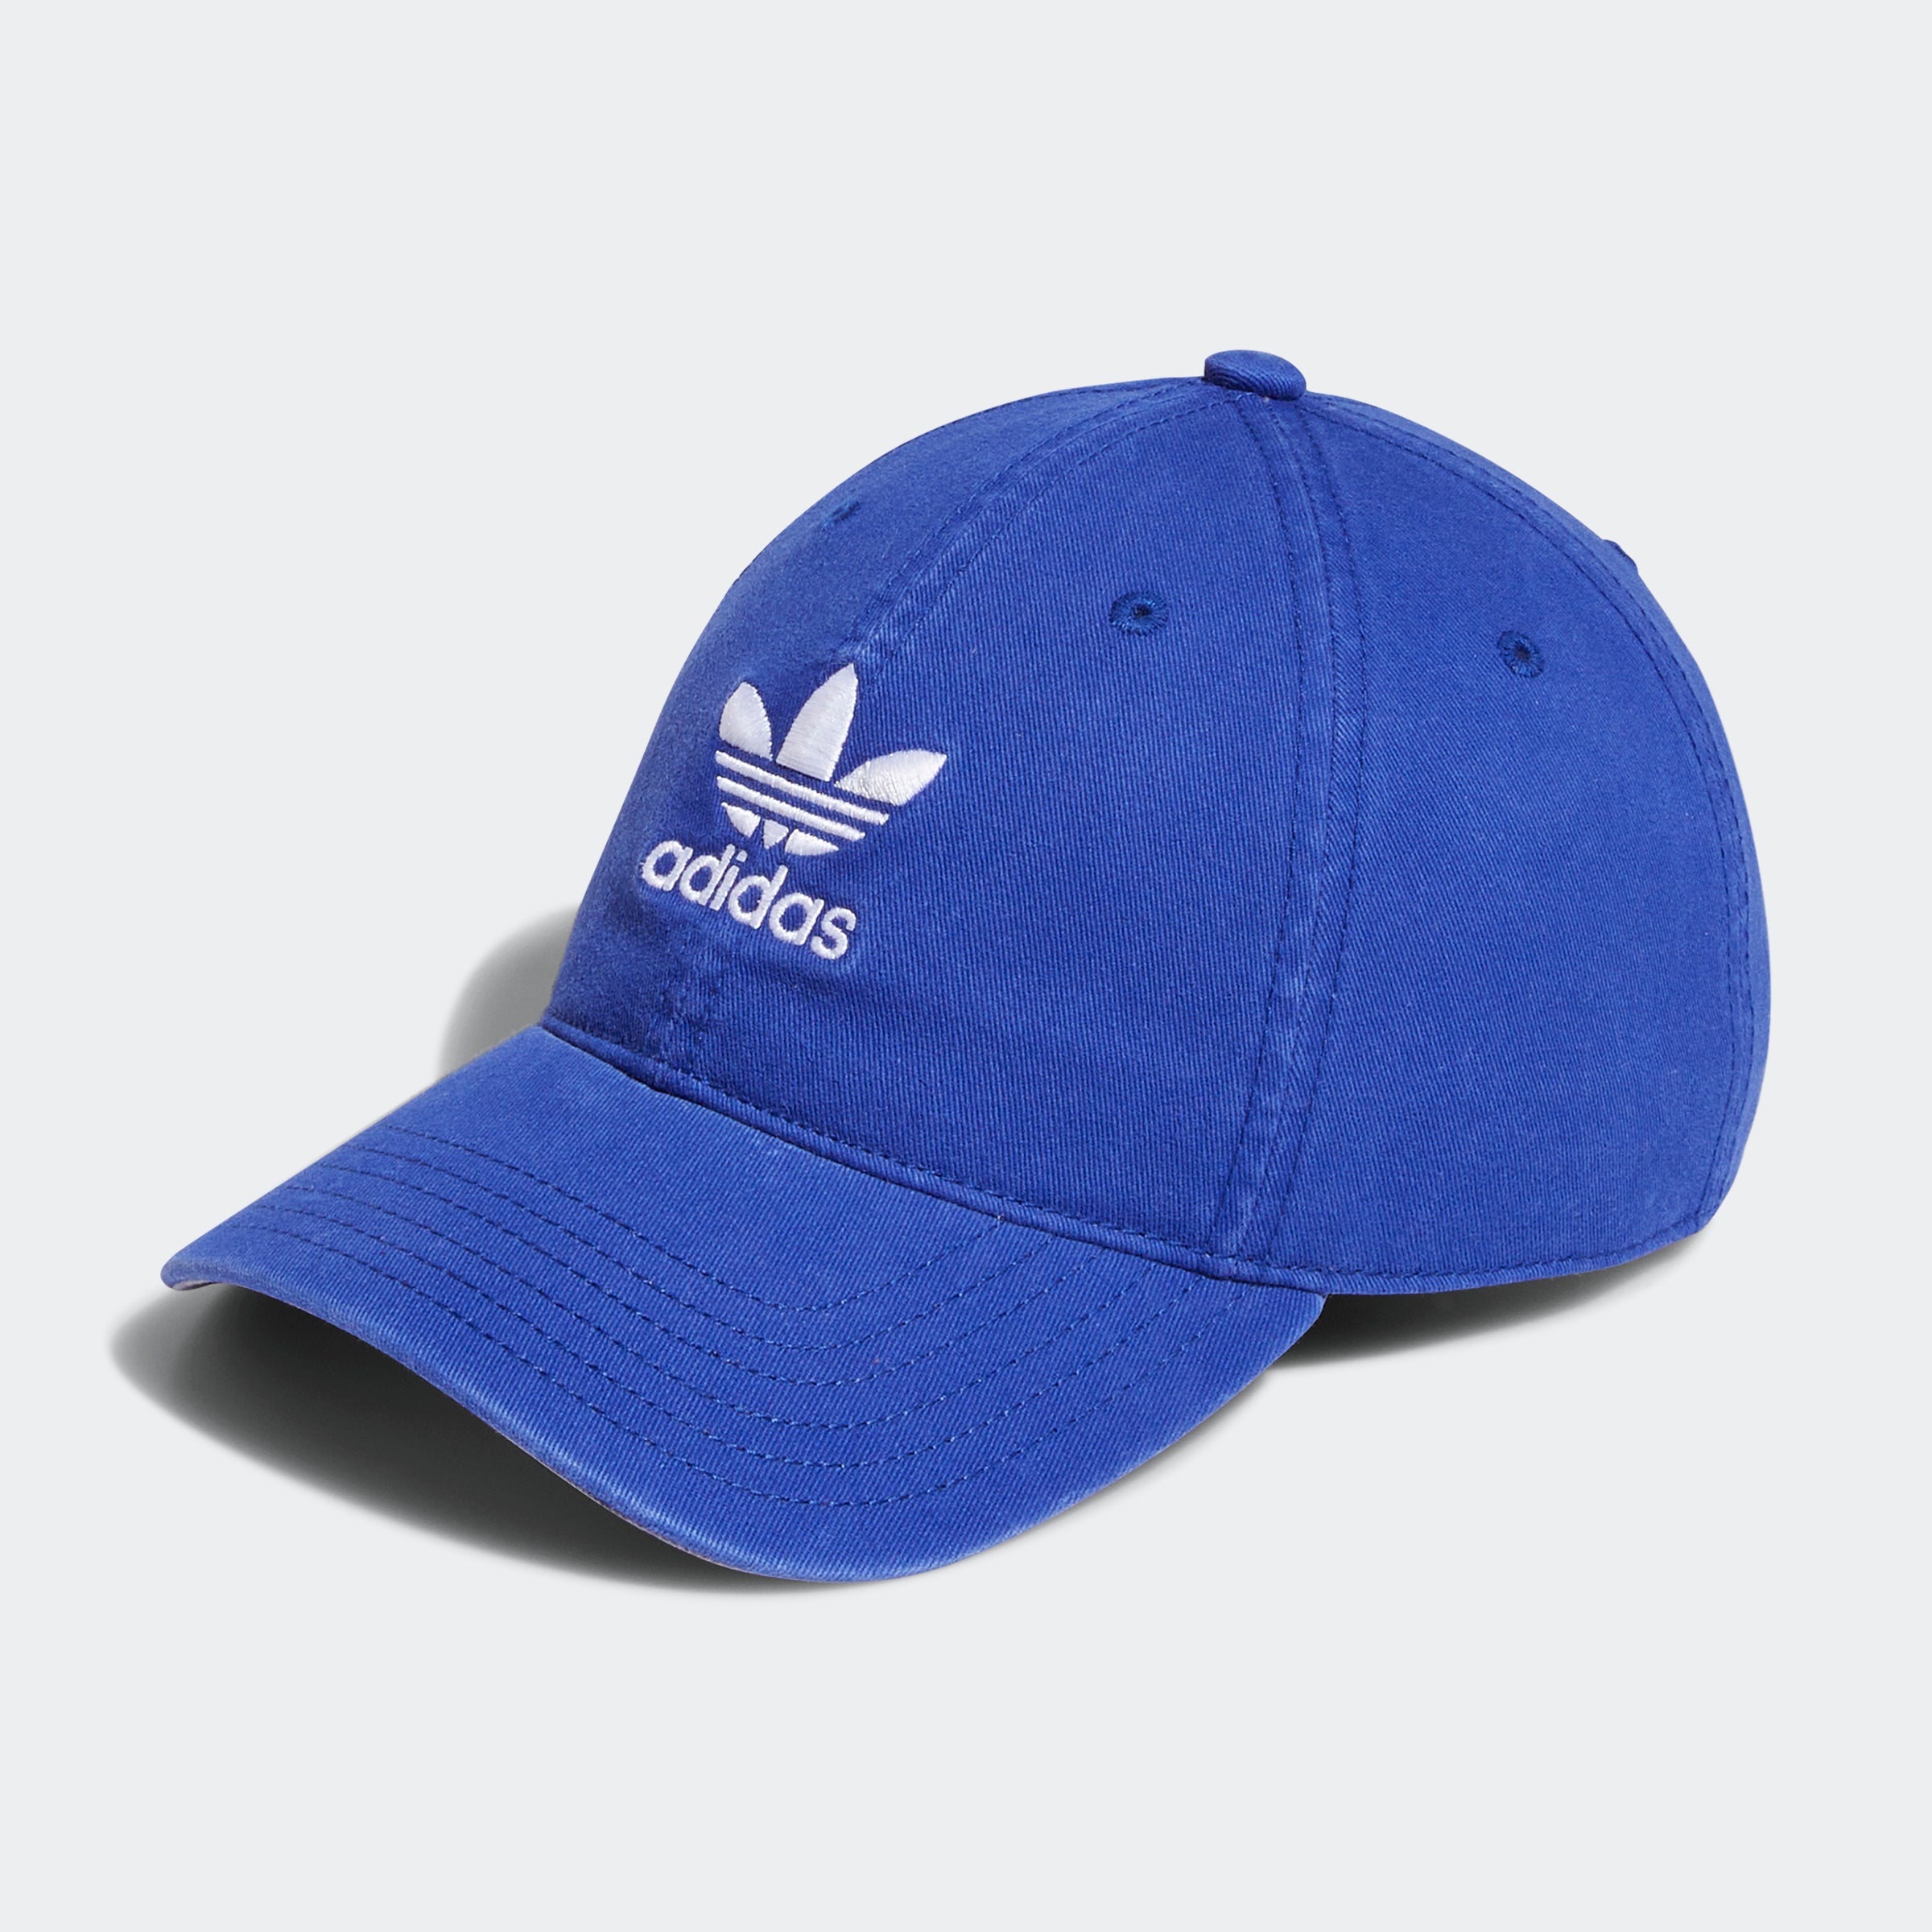 Marco Polo Martyr Kirurgi Men's adidas Relaxed Strapback Hat Blue GB4047 | Chicago City Sports